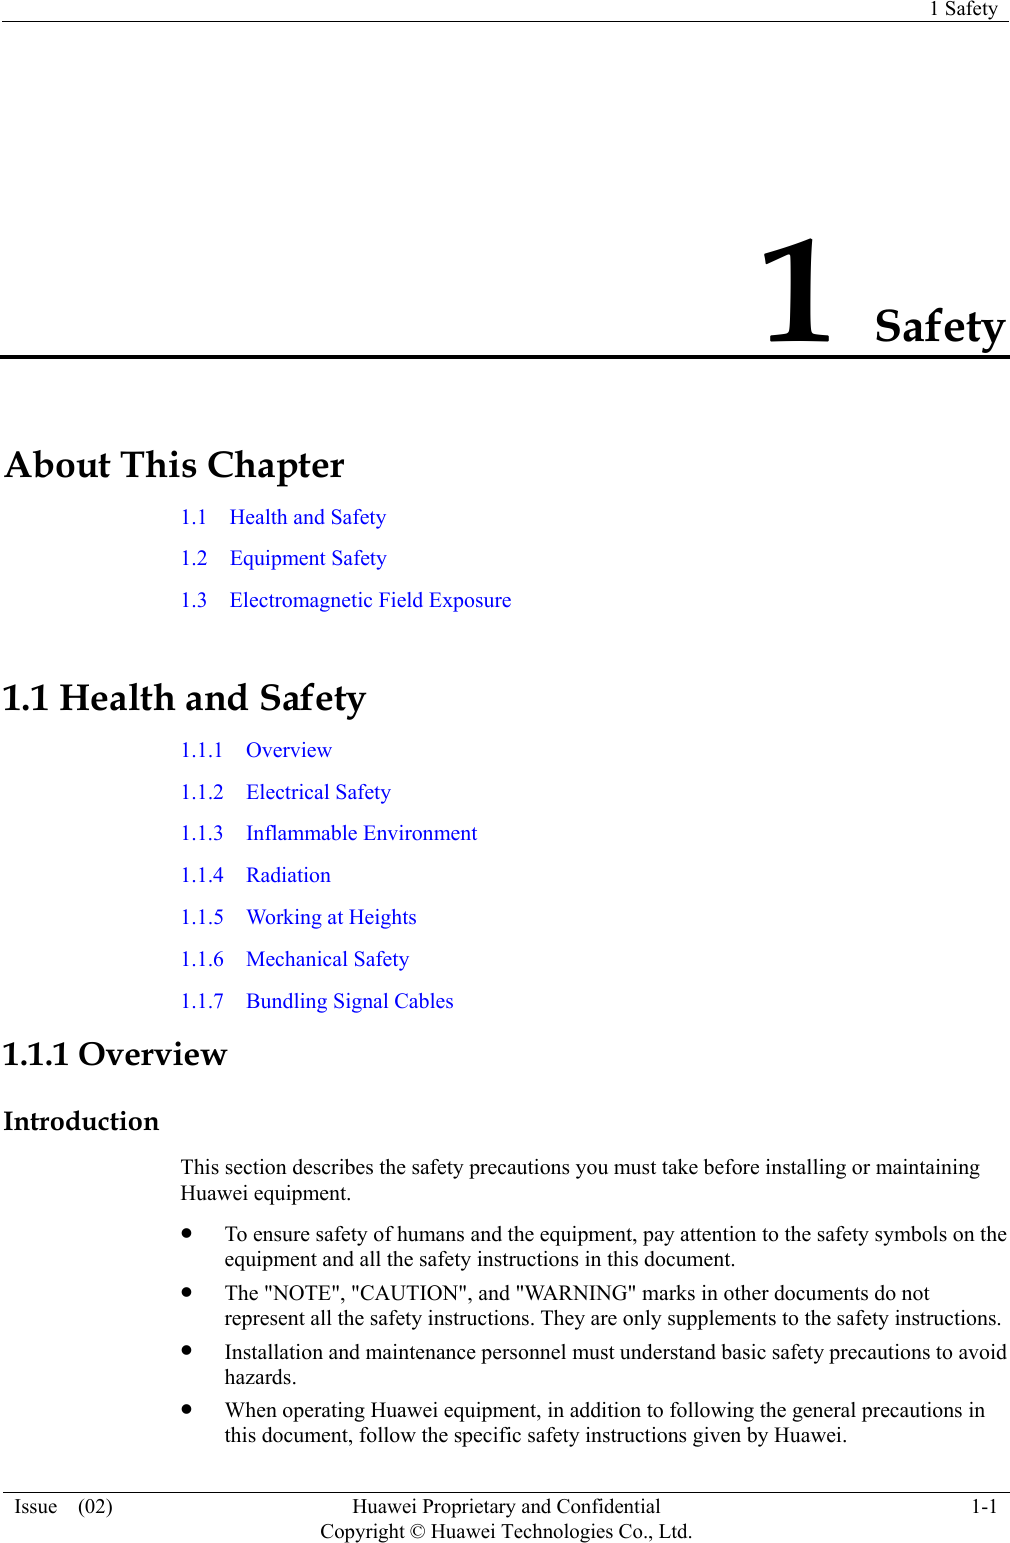   1 Safety Issue  (02)  Huawei Proprietary and Confidential     Copyright © Huawei Technologies Co., Ltd.1-1 1 Safety About This Chapter 1.1  Health and Safety 1.2  Equipment Safety 1.3  Electromagnetic Field Exposure 1.1 Health and Safety 1.1.1  Overview 1.1.2  Electrical Safety 1.1.3  Inflammable Environment 1.1.4  Radiation 1.1.5  Working at Heights 1.1.6  Mechanical Safety 1.1.7  Bundling Signal Cables 1.1.1 Overview Introduction This section describes the safety precautions you must take before installing or maintaining Huawei equipment. z To ensure safety of humans and the equipment, pay attention to the safety symbols on the equipment and all the safety instructions in this document. z The &quot;NOTE&quot;, &quot;CAUTION&quot;, and &quot;WARNING&quot; marks in other documents do not represent all the safety instructions. They are only supplements to the safety instructions. z Installation and maintenance personnel must understand basic safety precautions to avoid hazards. z When operating Huawei equipment, in addition to following the general precautions in this document, follow the specific safety instructions given by Huawei. 